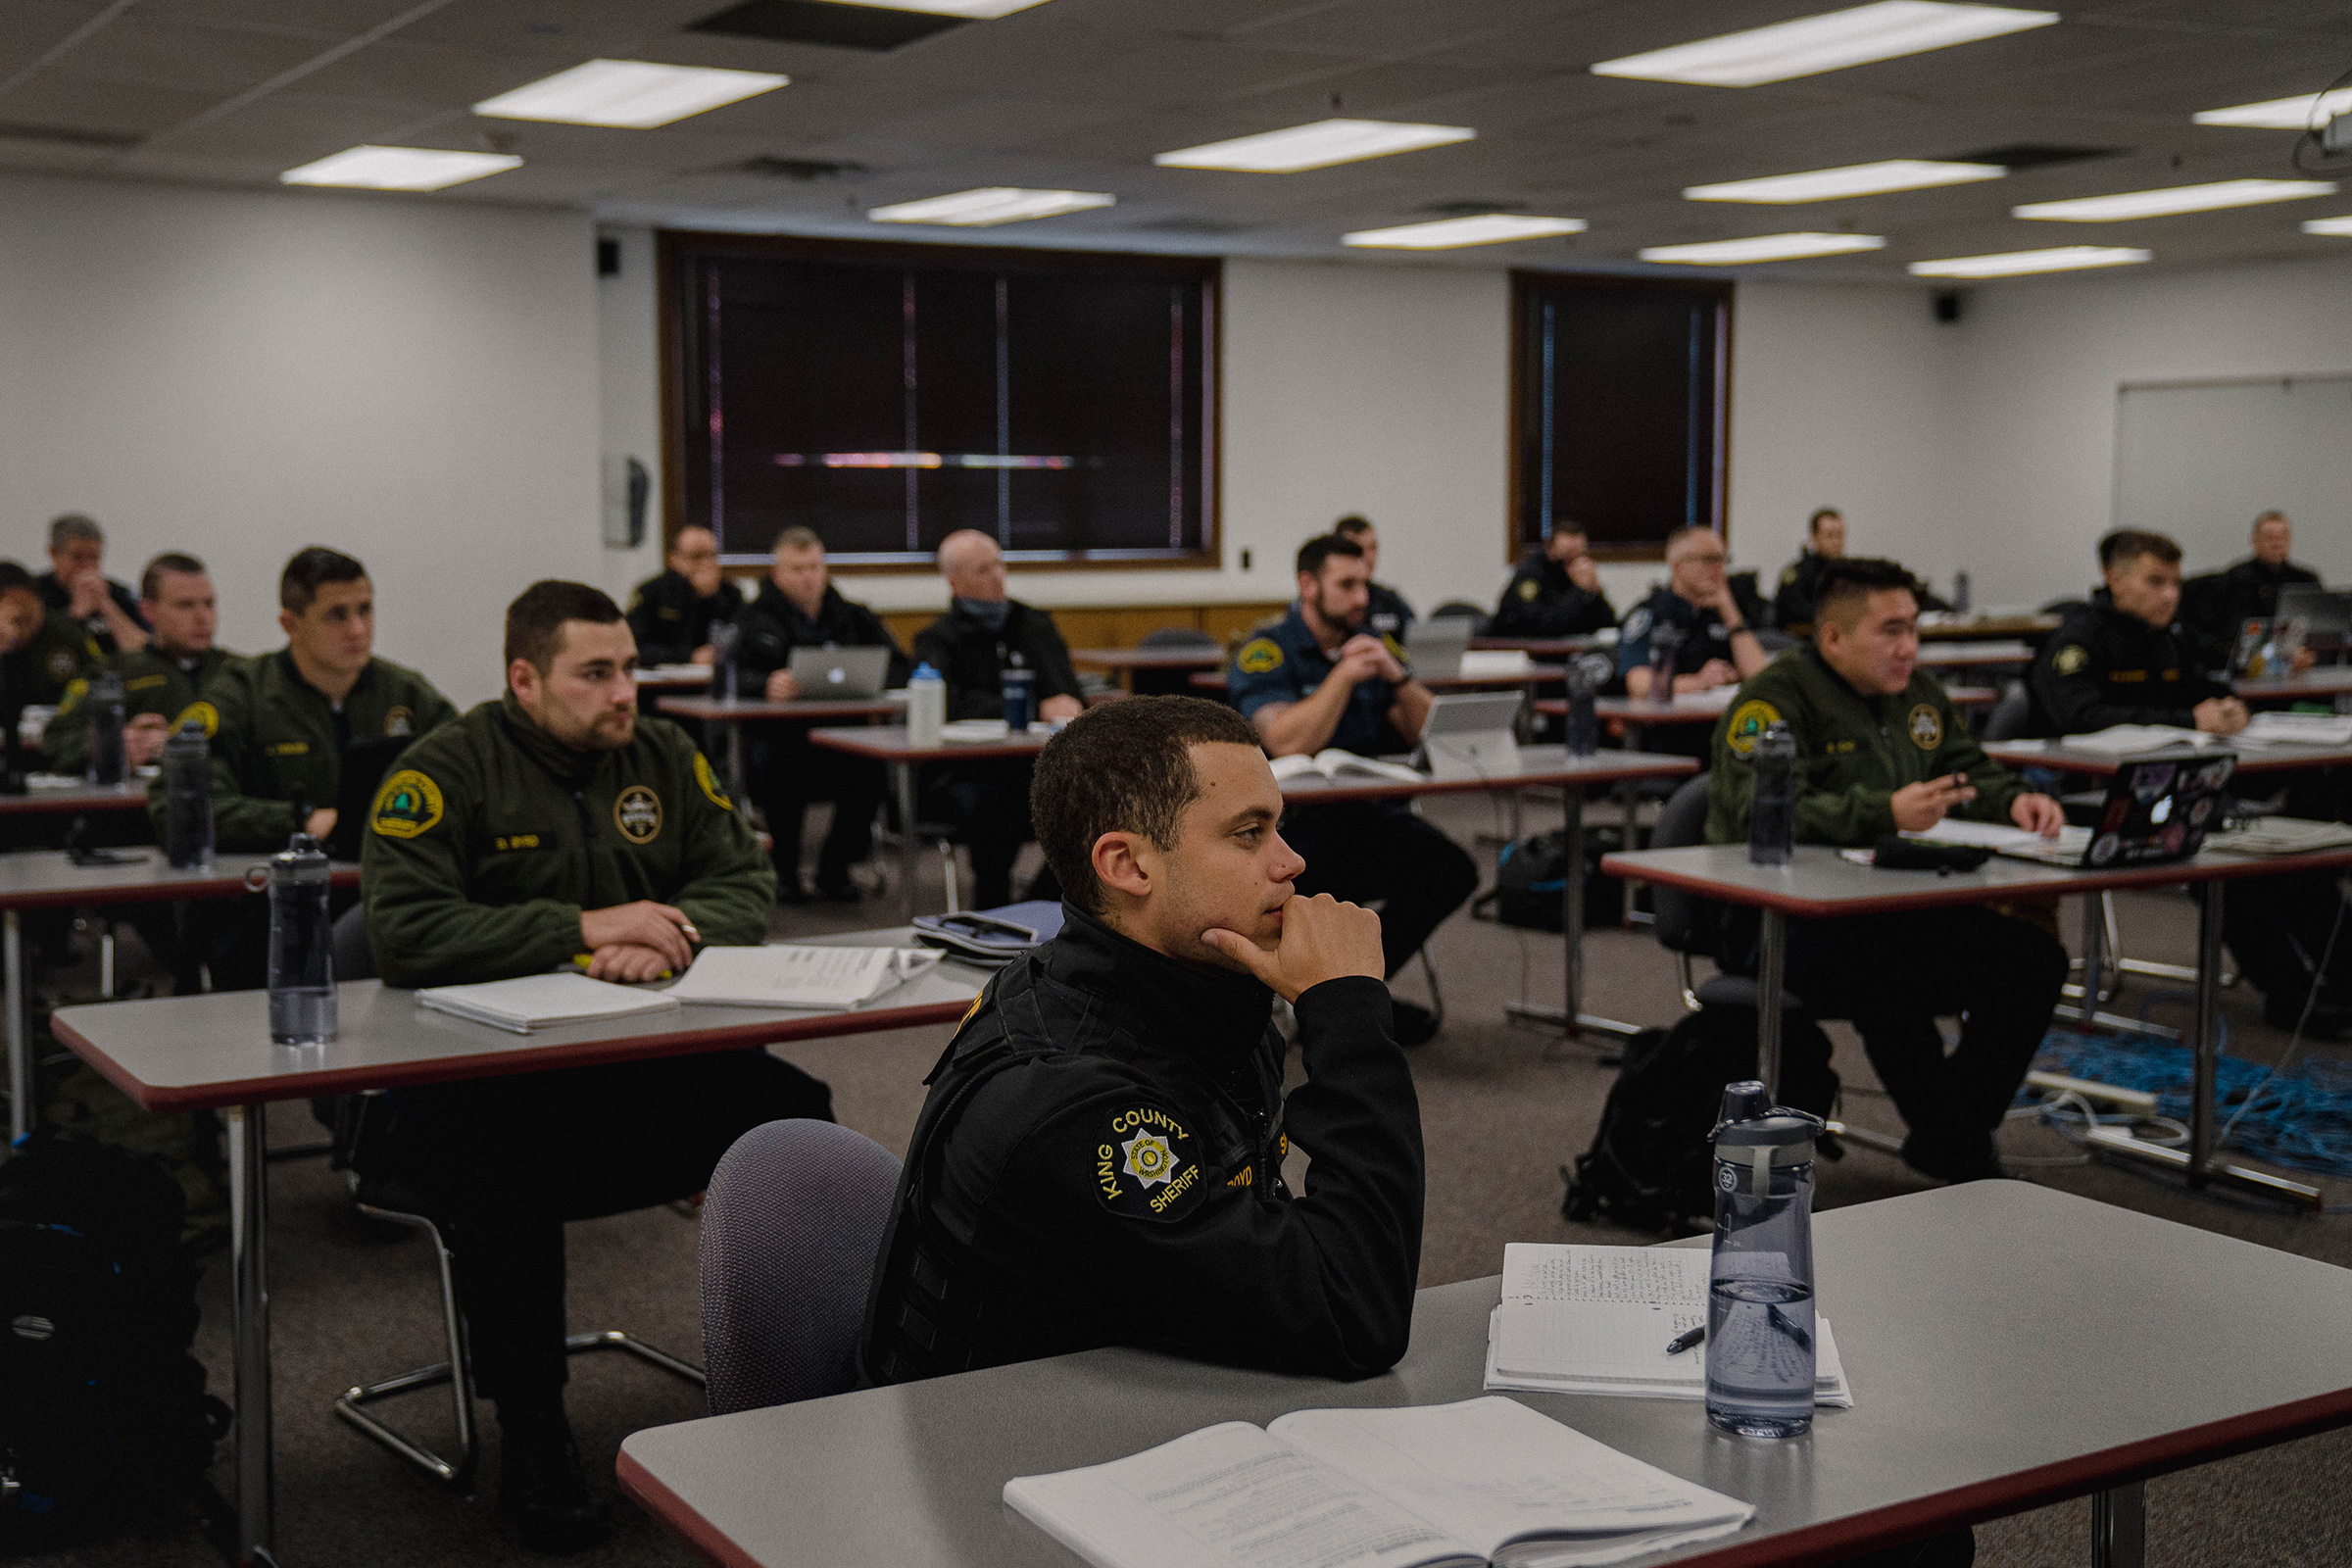 Police recruits attend a criminal law class.